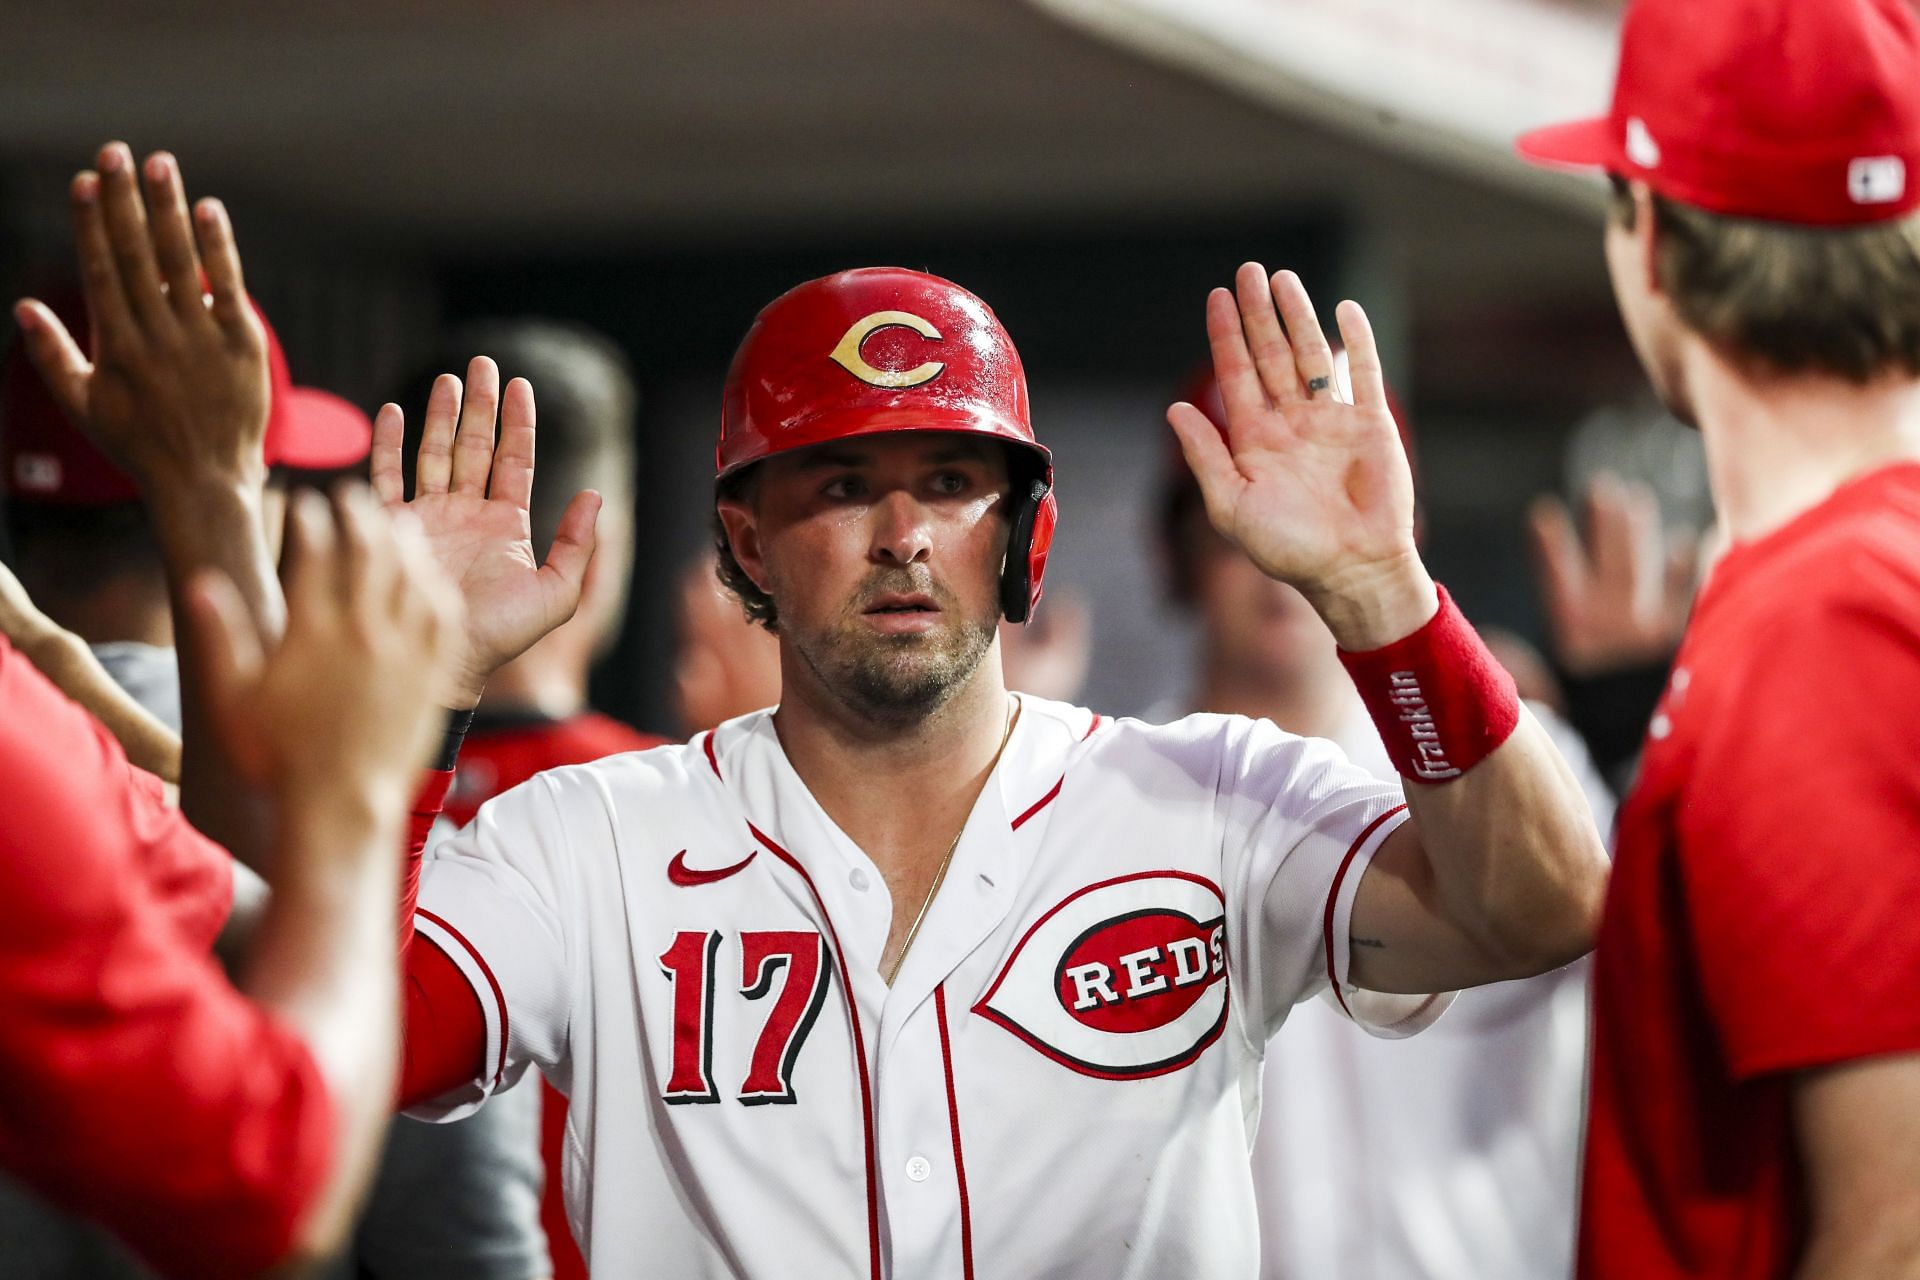 Kyle Farmer high fives his teammates after scoring in the sixth inning at Great American Ball Park